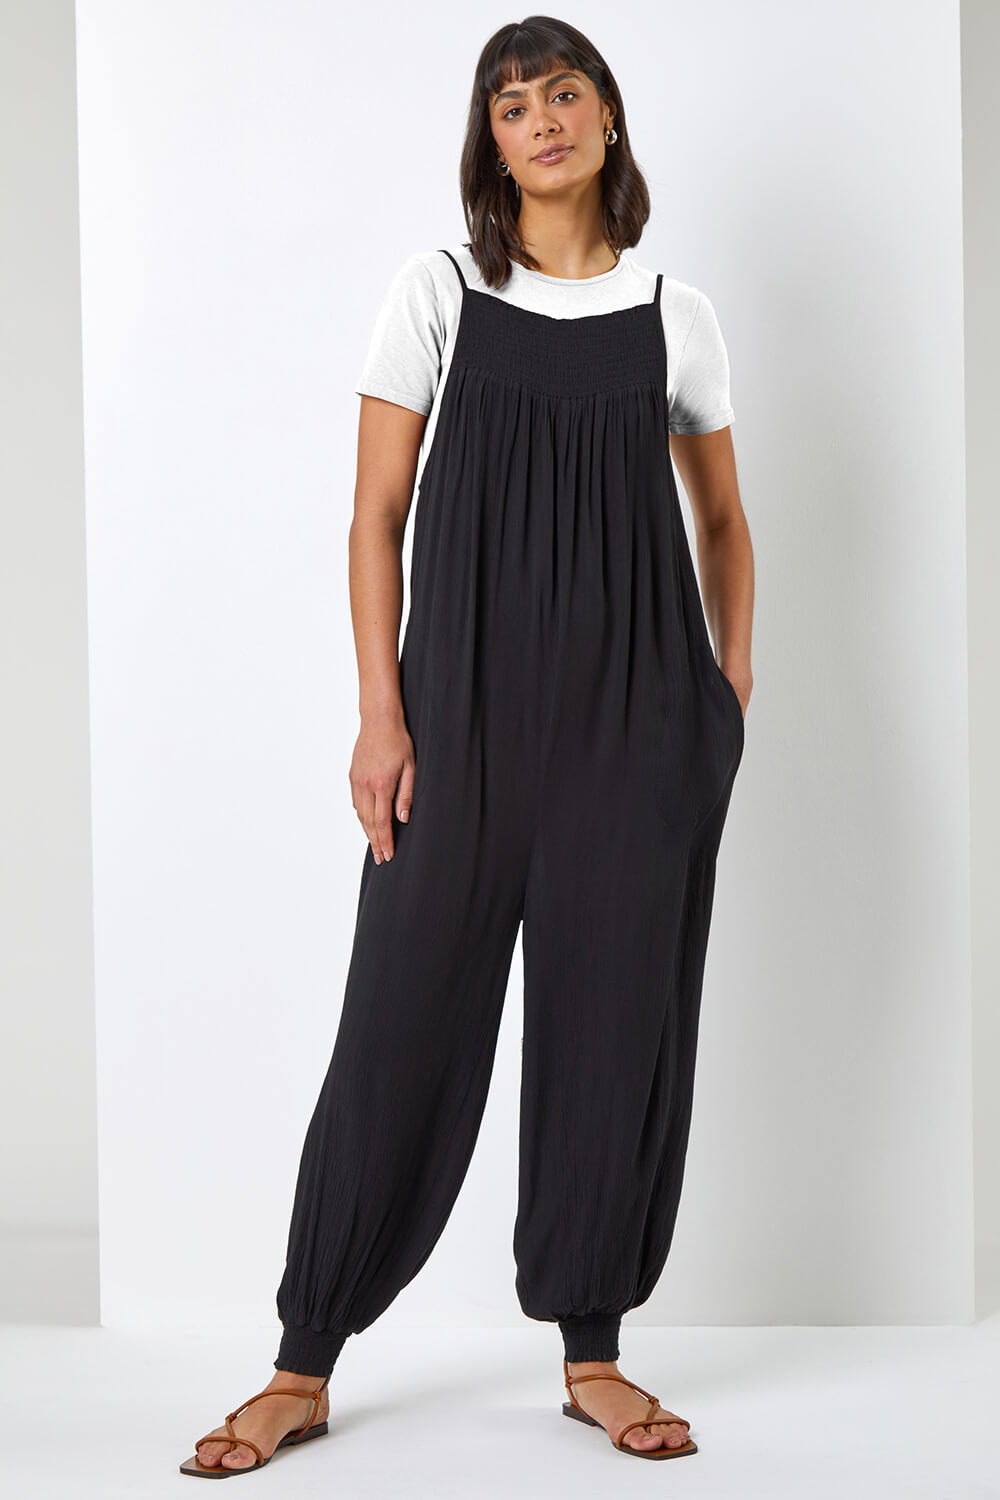 Black Strappy Full Length Shirred Jumpsuit, Image 3 of 5